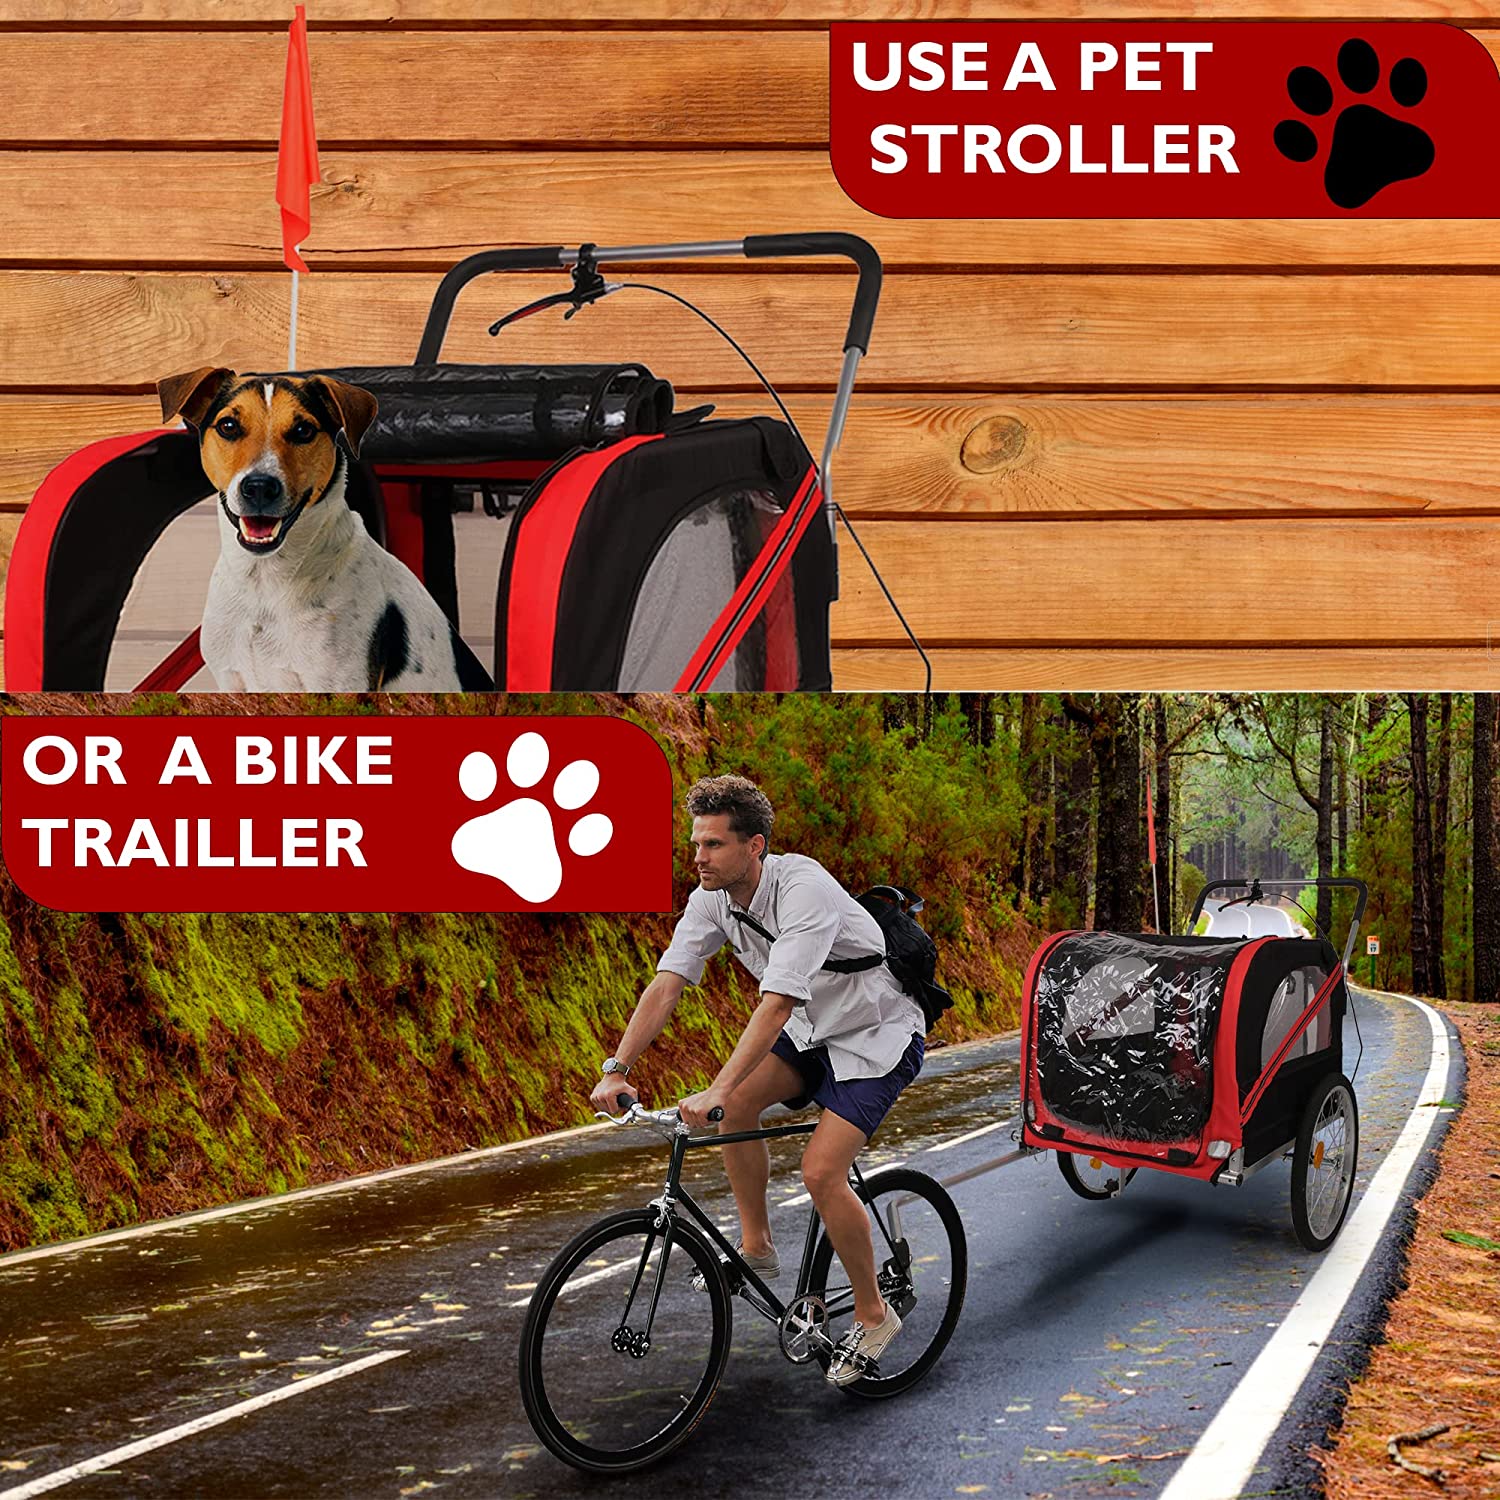 Dog Bike Trailer Cart 2 in 1 Pet Bicycle Stroller for Travel with Reflectors Parking Brake Breathable Protective Net, Red